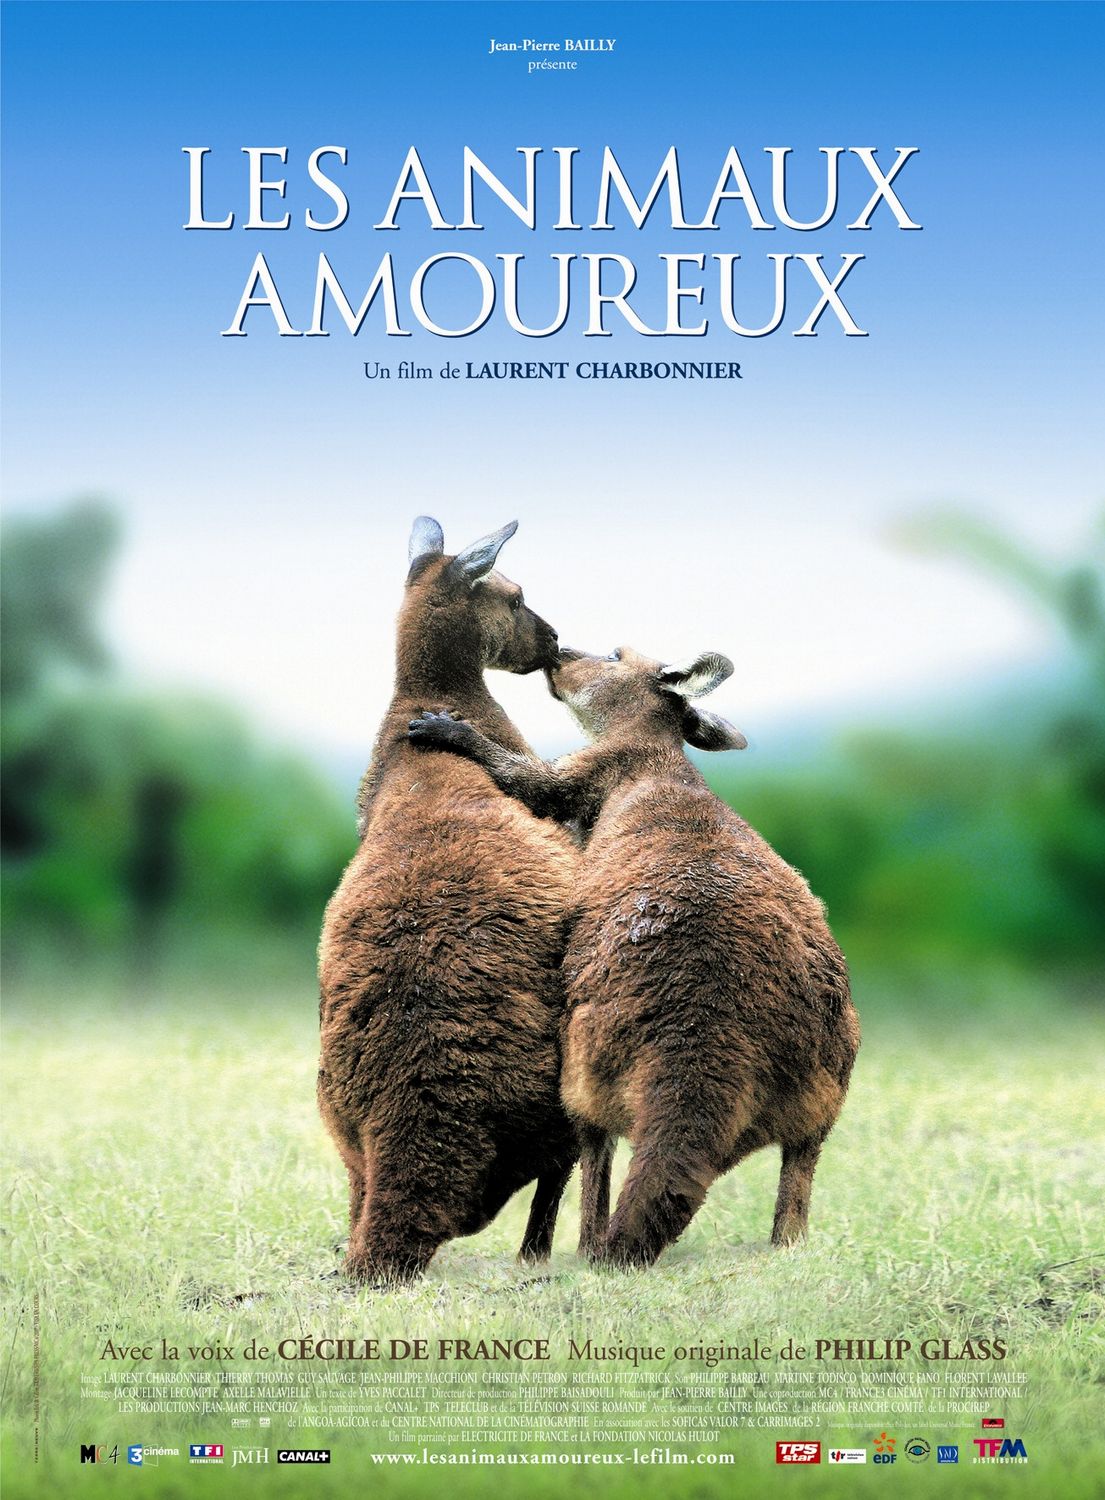 Extra Large Movie Poster Image for Animaux amoureux, Les 